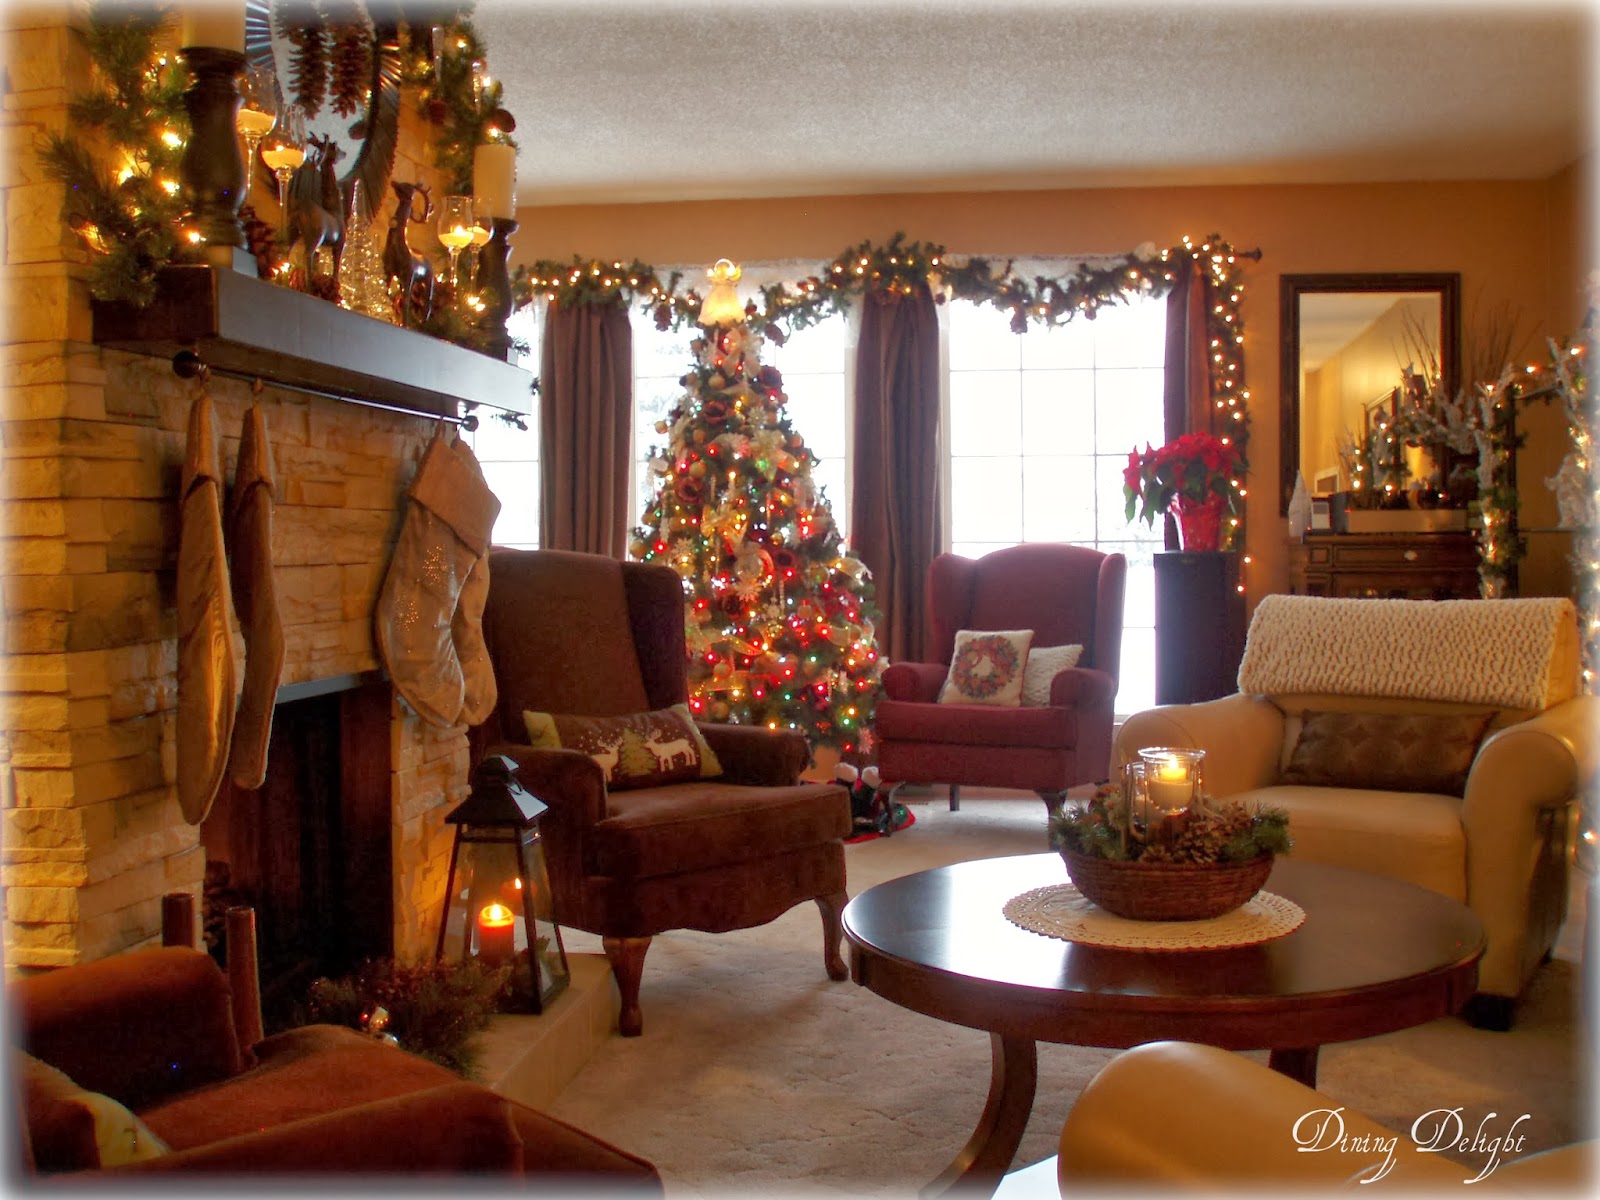 Dining Delight: Christmas Home Tour 2013